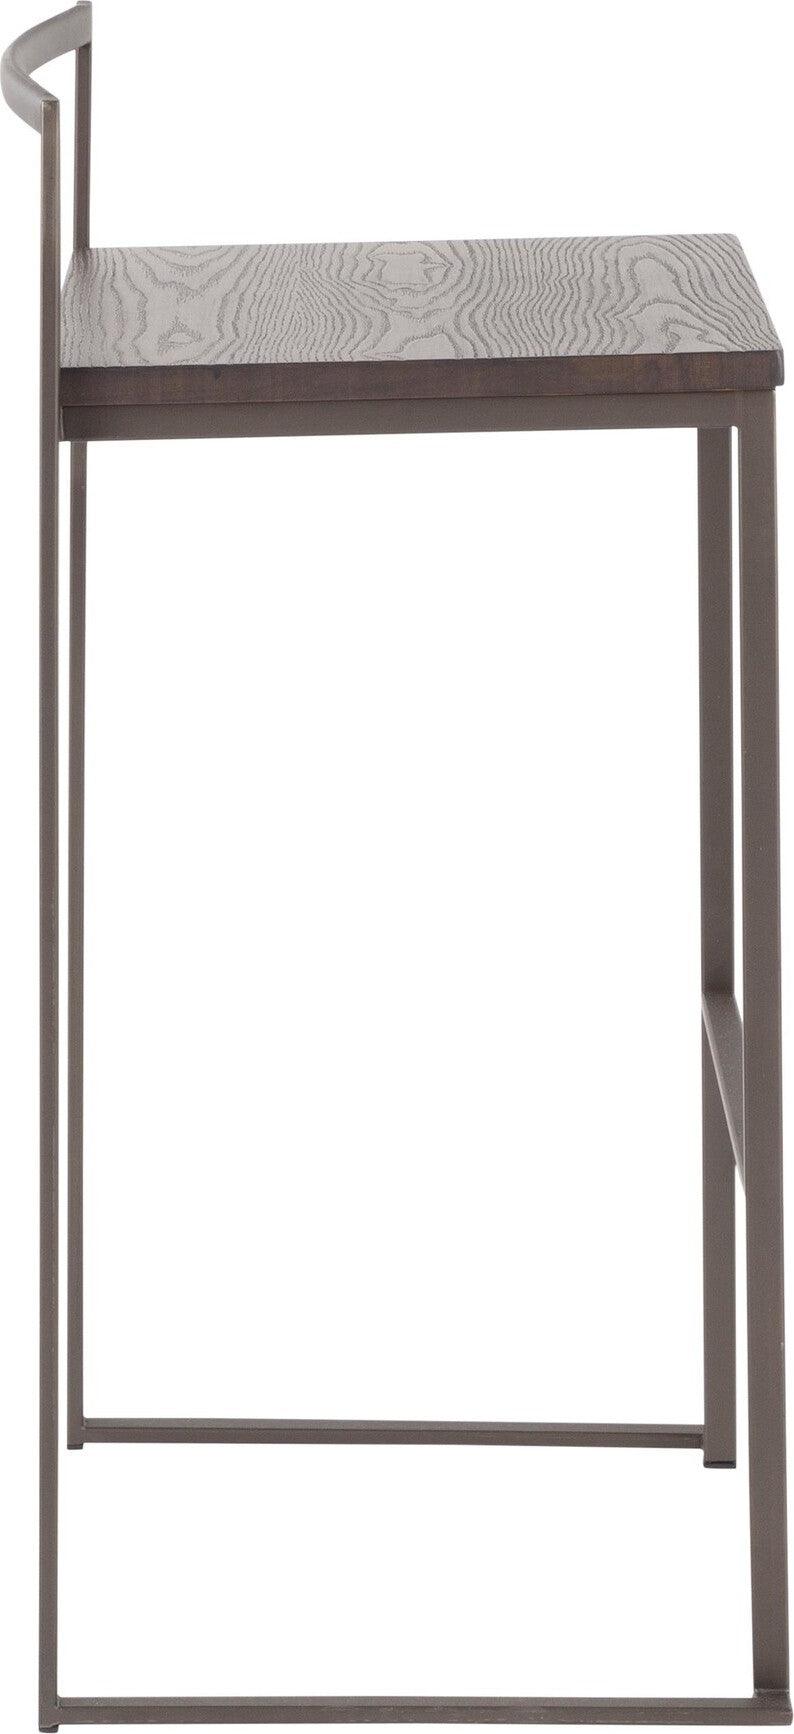 Lumisource Barstools - Fuji Barstool in Antique with an Espresso Wood-Pressed Grain Bamboo Seat (Set of 2)